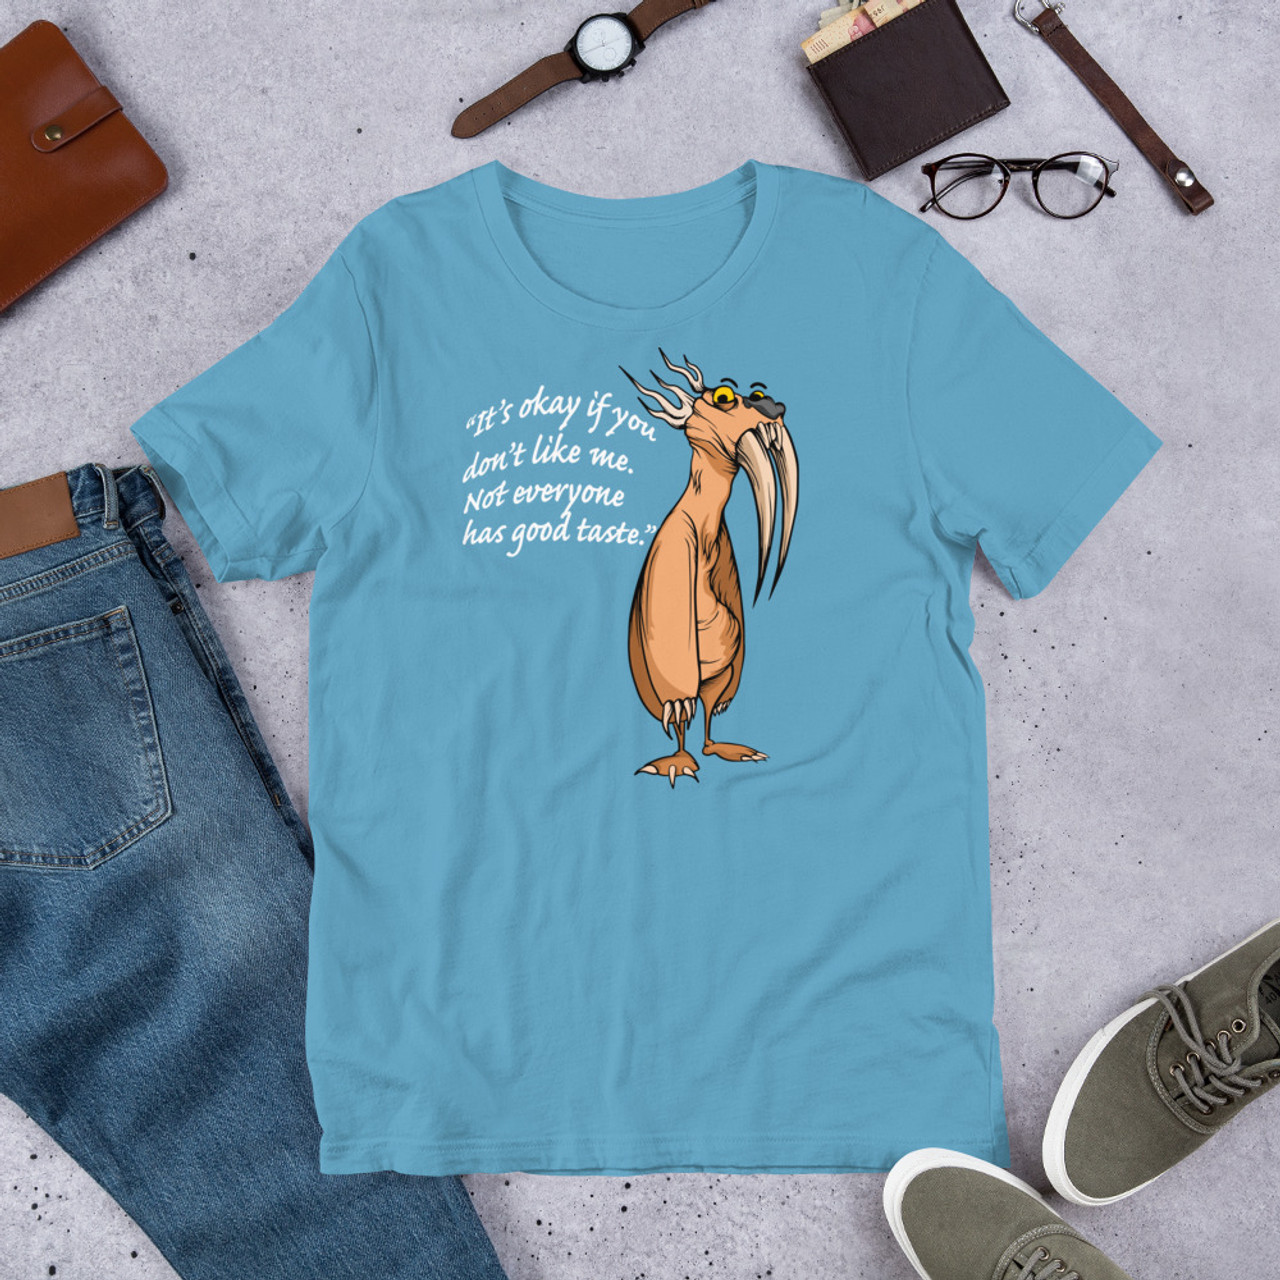 Ocean Blue T-Shirt - Bella + Canvas 3001 It's okay if you don't like me